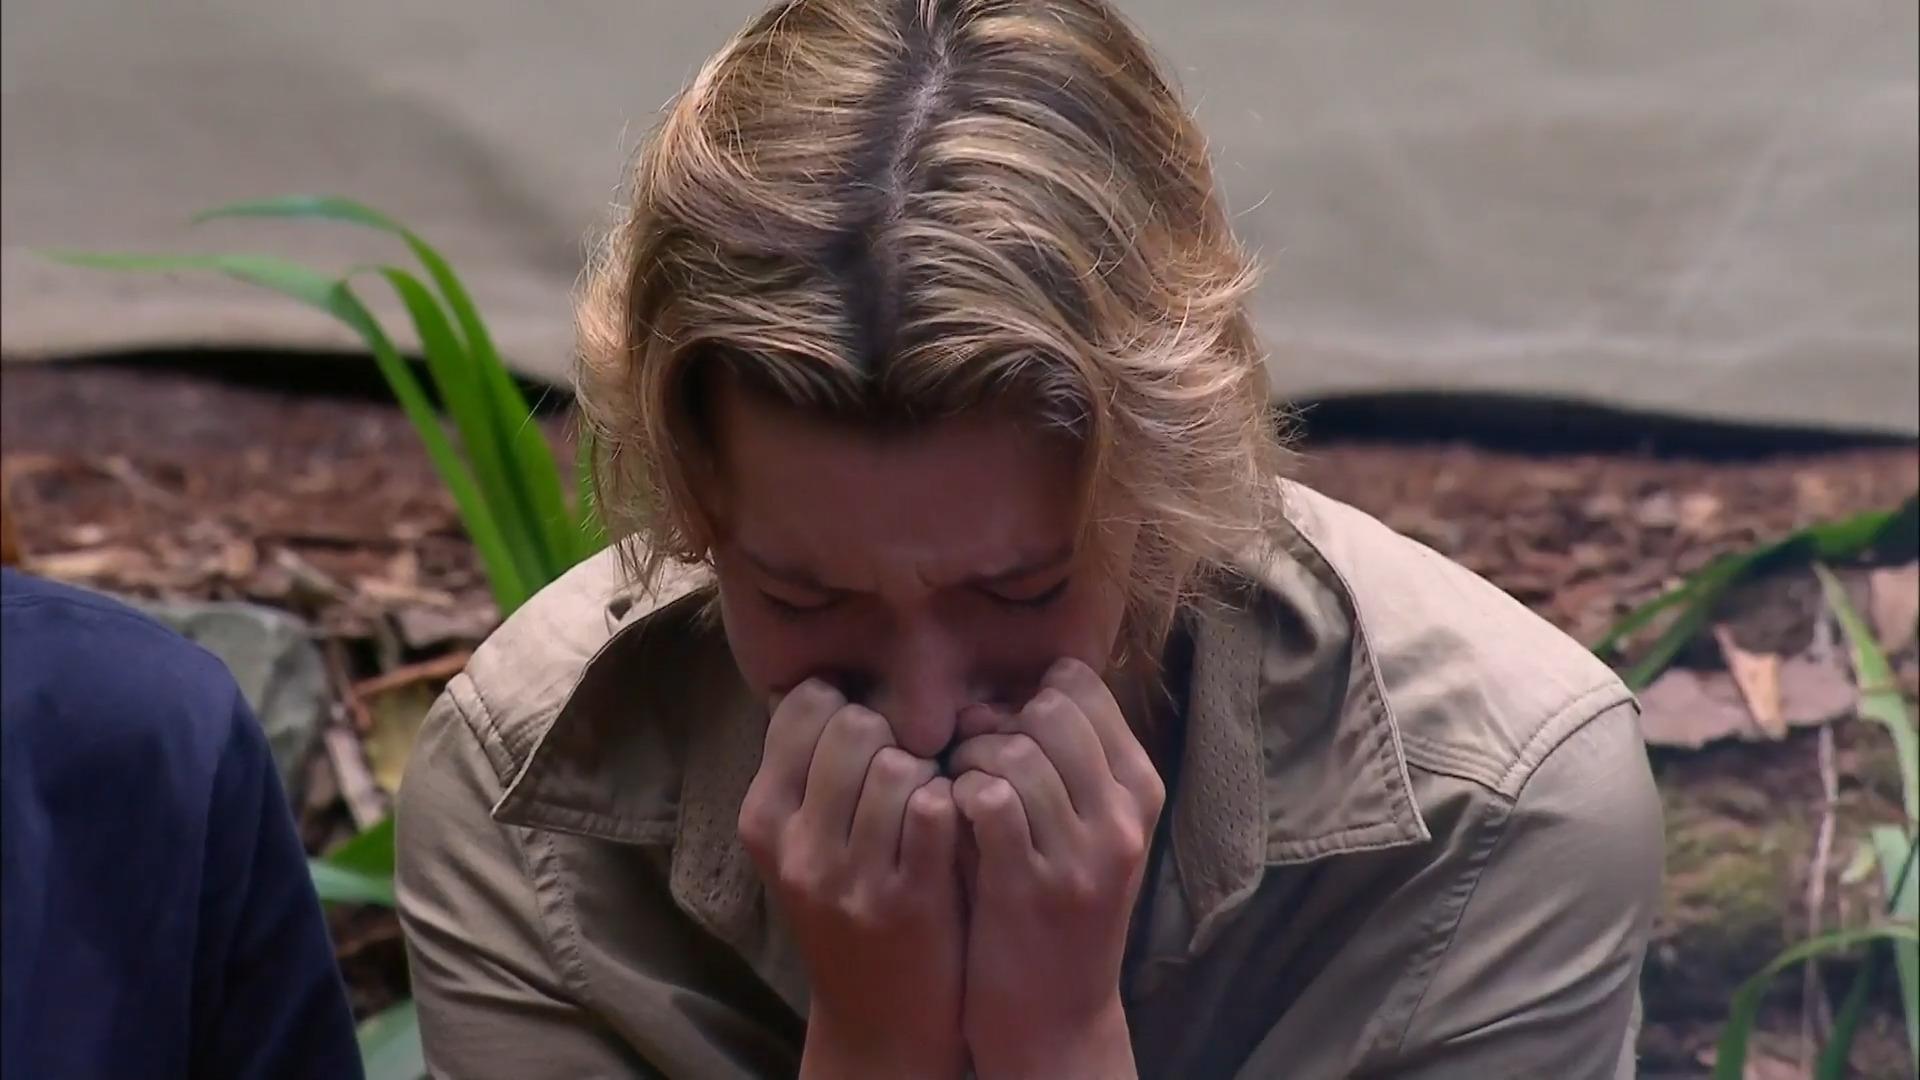 Sarah Kern has to leave the jungle camp on day 9. The jungle viewers have spoken!